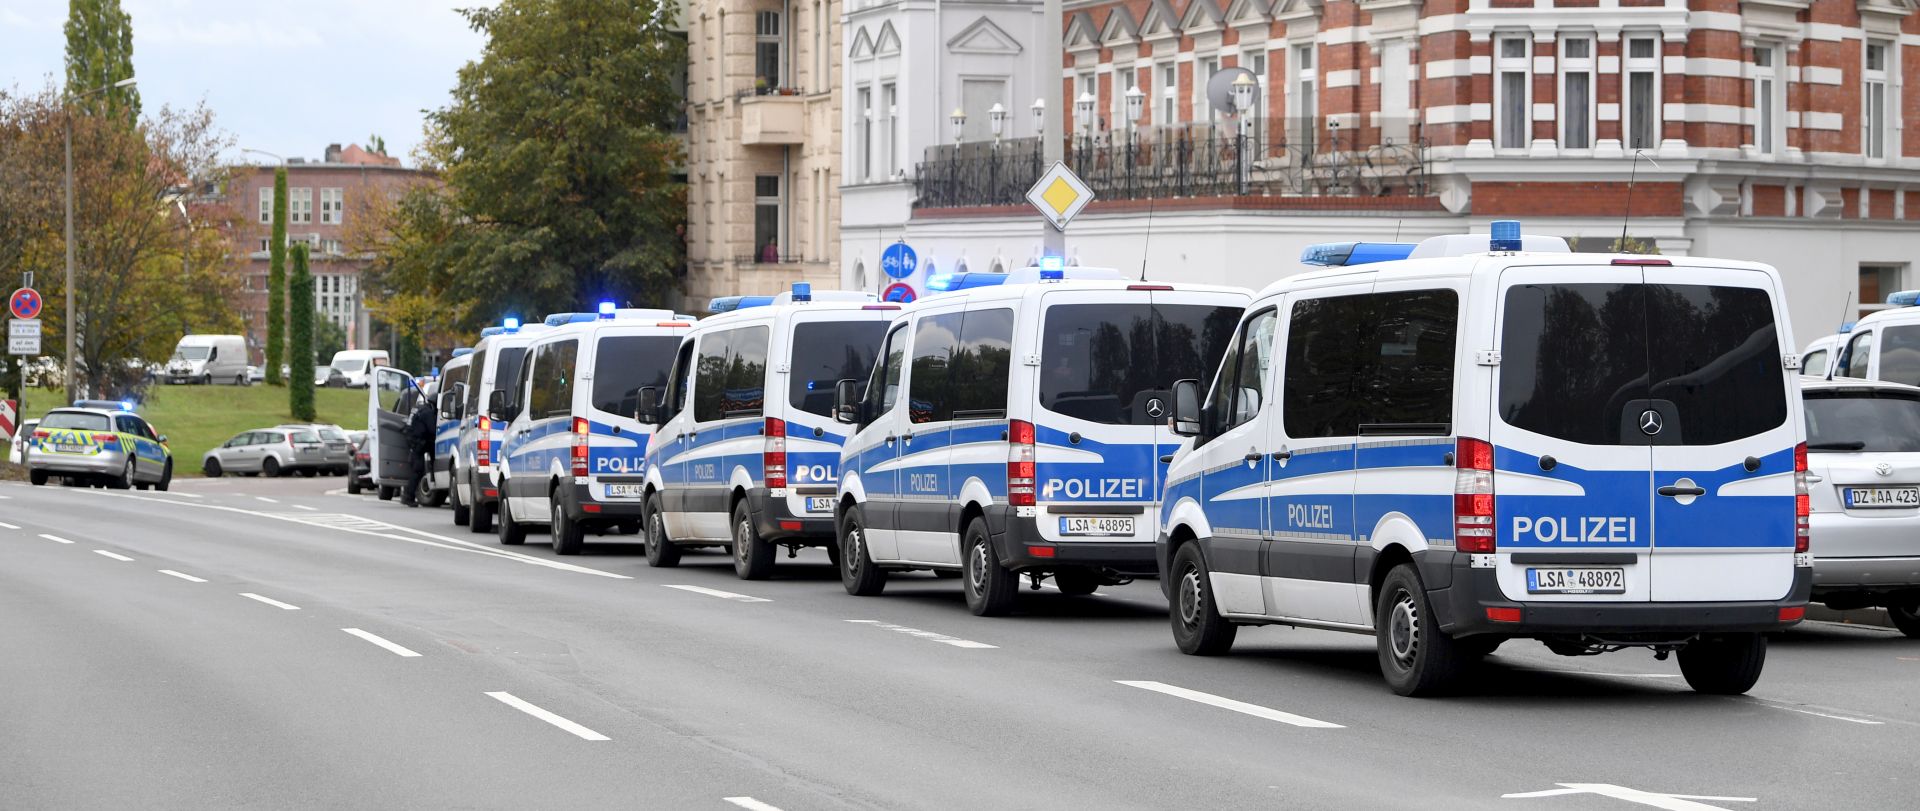 epa07907593 Police cars stand near a Synagogue after a shooting in Halle, Germany, 09 October 2019. According to the police two people were killed in shootings in front of a Synagogue and a Kebab shop in the Paulus district of Halle in the East German federal state of Saxony-Anhalt. Police stated a suspect is already in arrest. Media report the mayor of Halle speaks of an amok situation.  EPA/FILIP SINGER